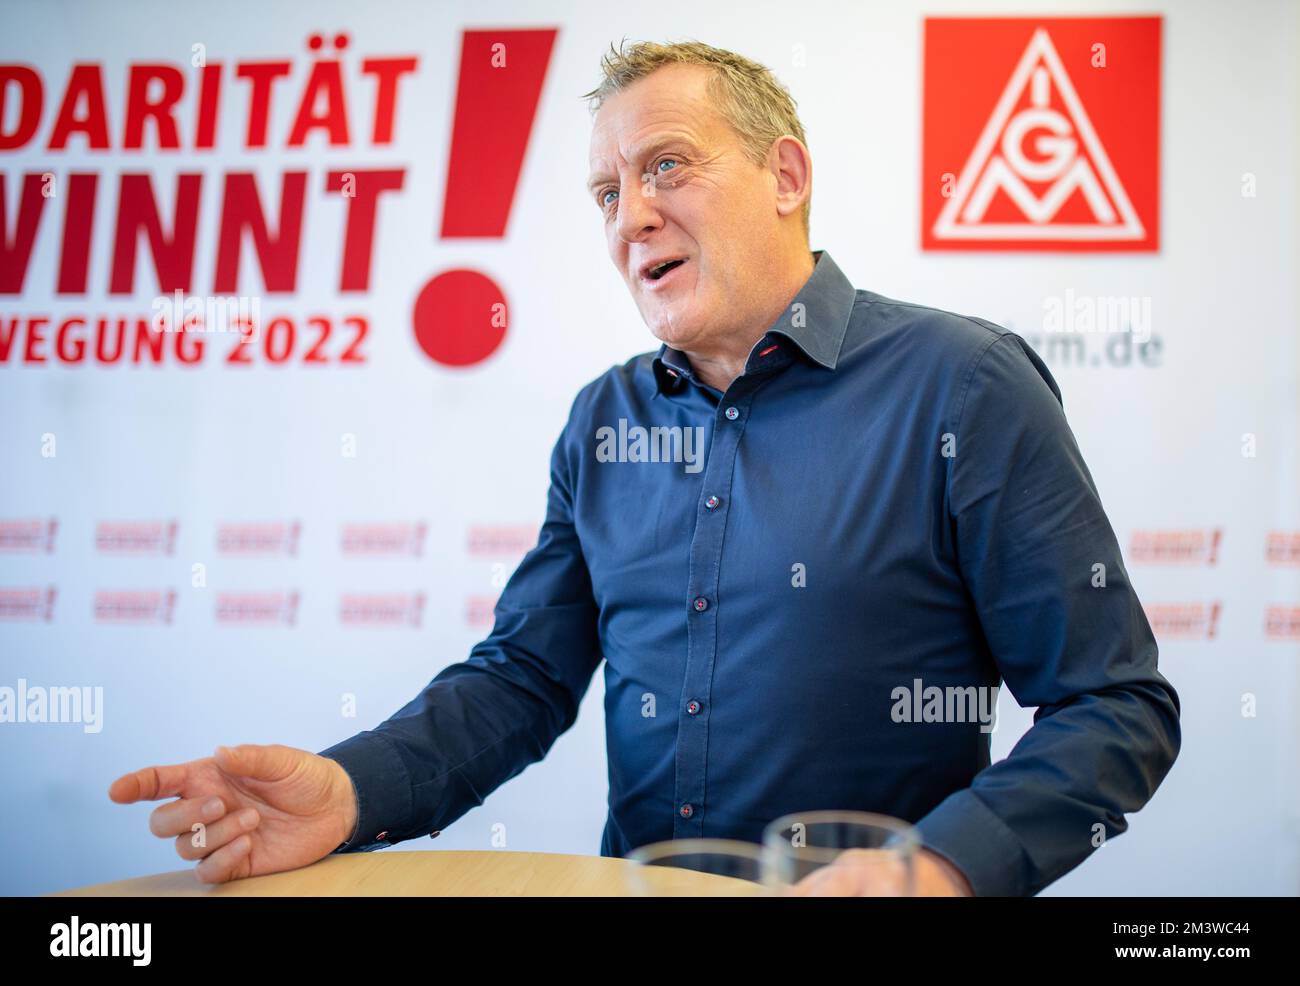 Stuttgart, Germany. 13th Dec, 2022. Roman Zitzelsberger, district leader of IG Metall Baden-Württemberg, in an interview with dpa. In the debate about longer working hours until retirement, Zitzelsberger, who is being considered as the successor to IG Metall national leader Hofmann, accused politicians of a lack of ideas. He said there were only appealing or alarmist statements. Credit: Christoph Schmidt/dpa/Alamy Live News Stock Photo